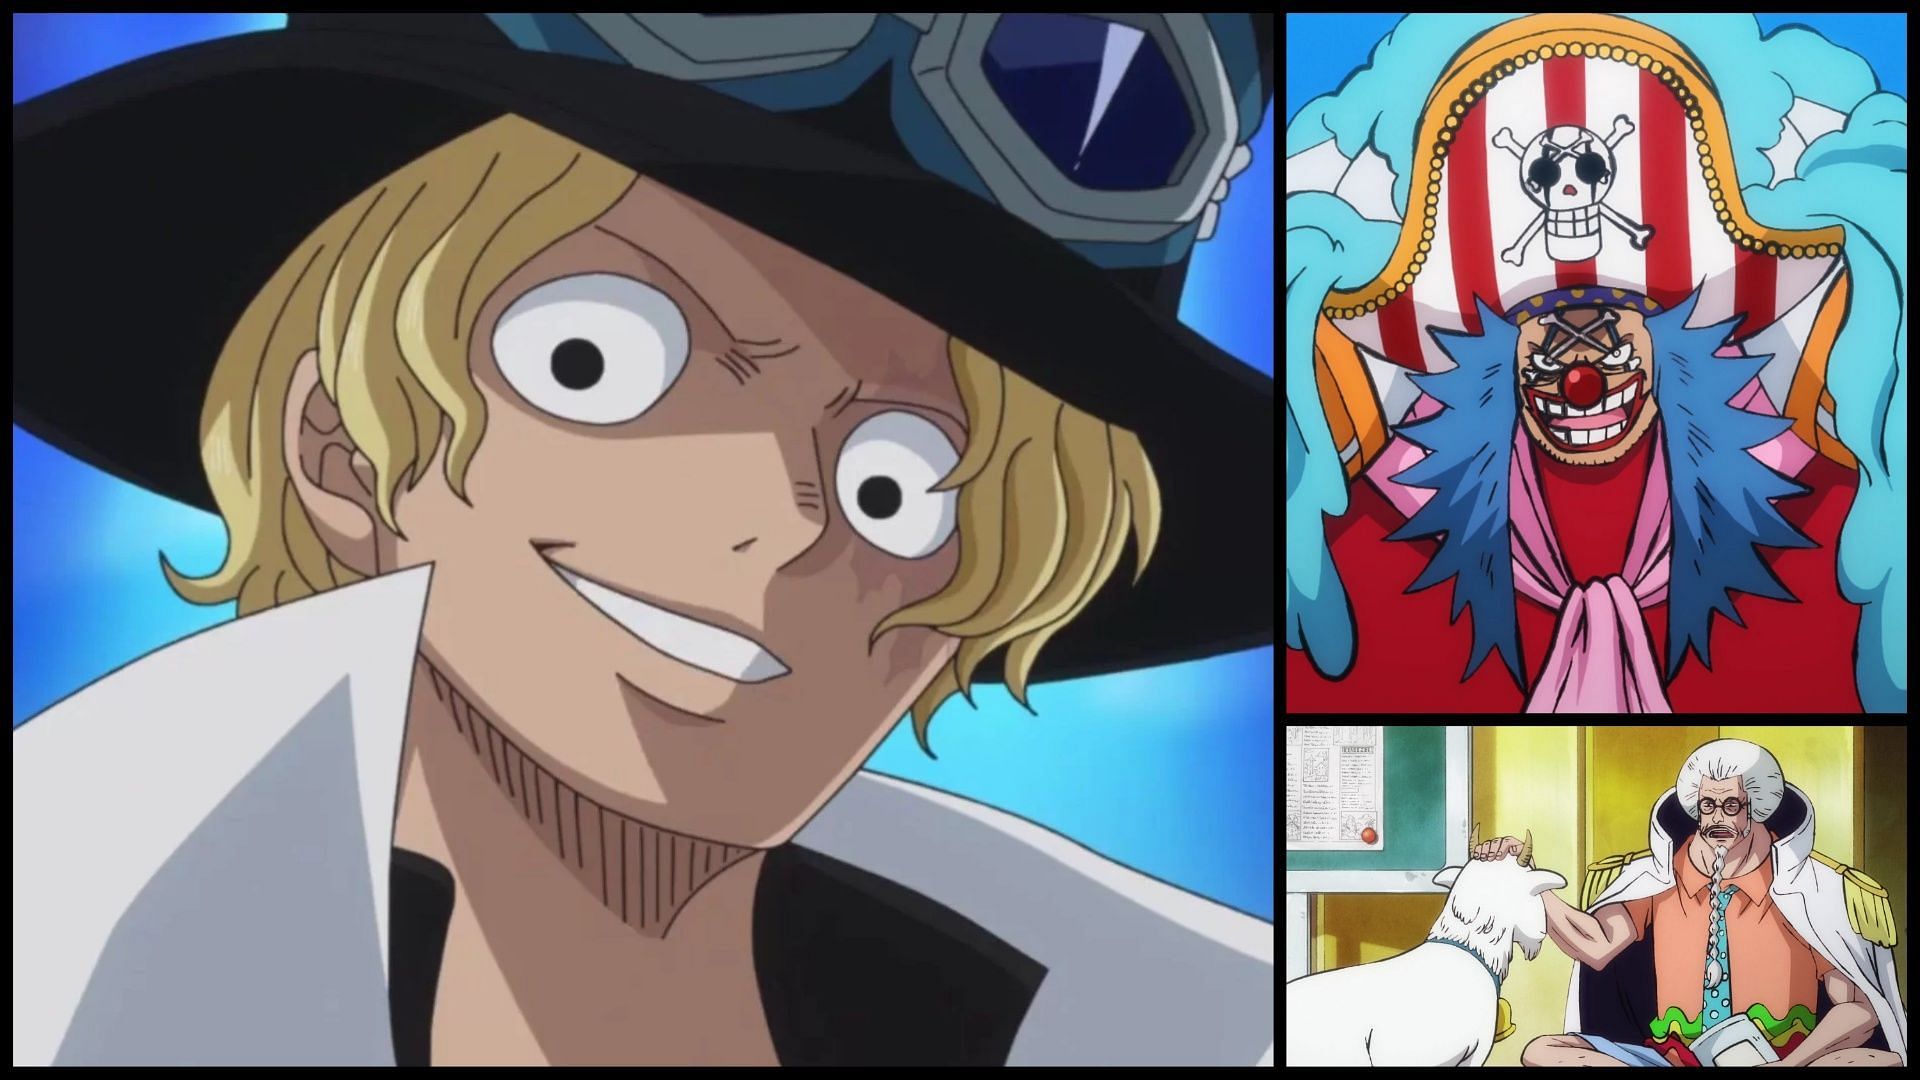 Sabo and Buggy steal the show as Garp